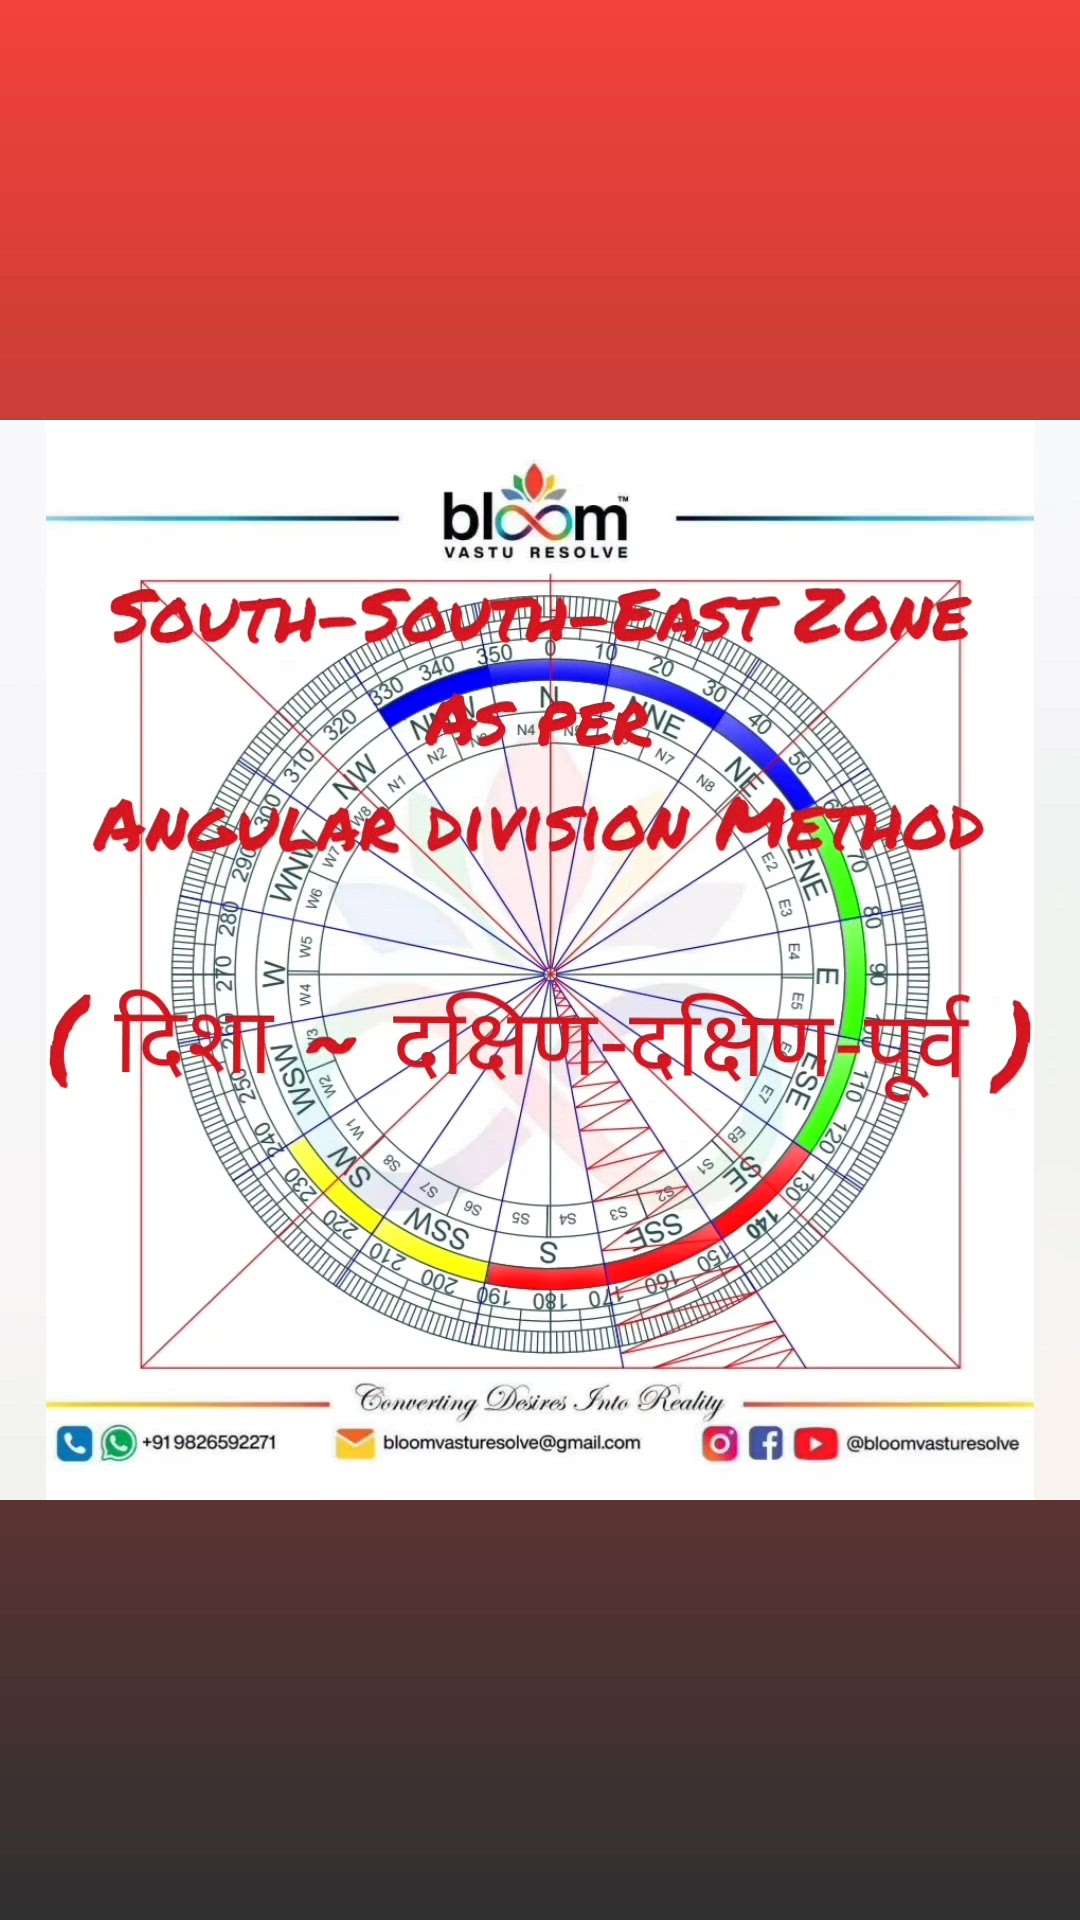 Your queries and comments are always welcome.
For more Vastu please follow @bloomvasturesolve
on YouTube, Instagram & Facebook
.
.
For personal consultation, feel free to contact certified MahaVastu Expert through
M - 9826592271
Or
bloomvasturesolve@gmail.com

#vastu 
#mahavastu #mahavastuexpert
#bloomvasturesolve
#vastuforhome 
#vastuforbusiness 
#ssezone 
#vastutips